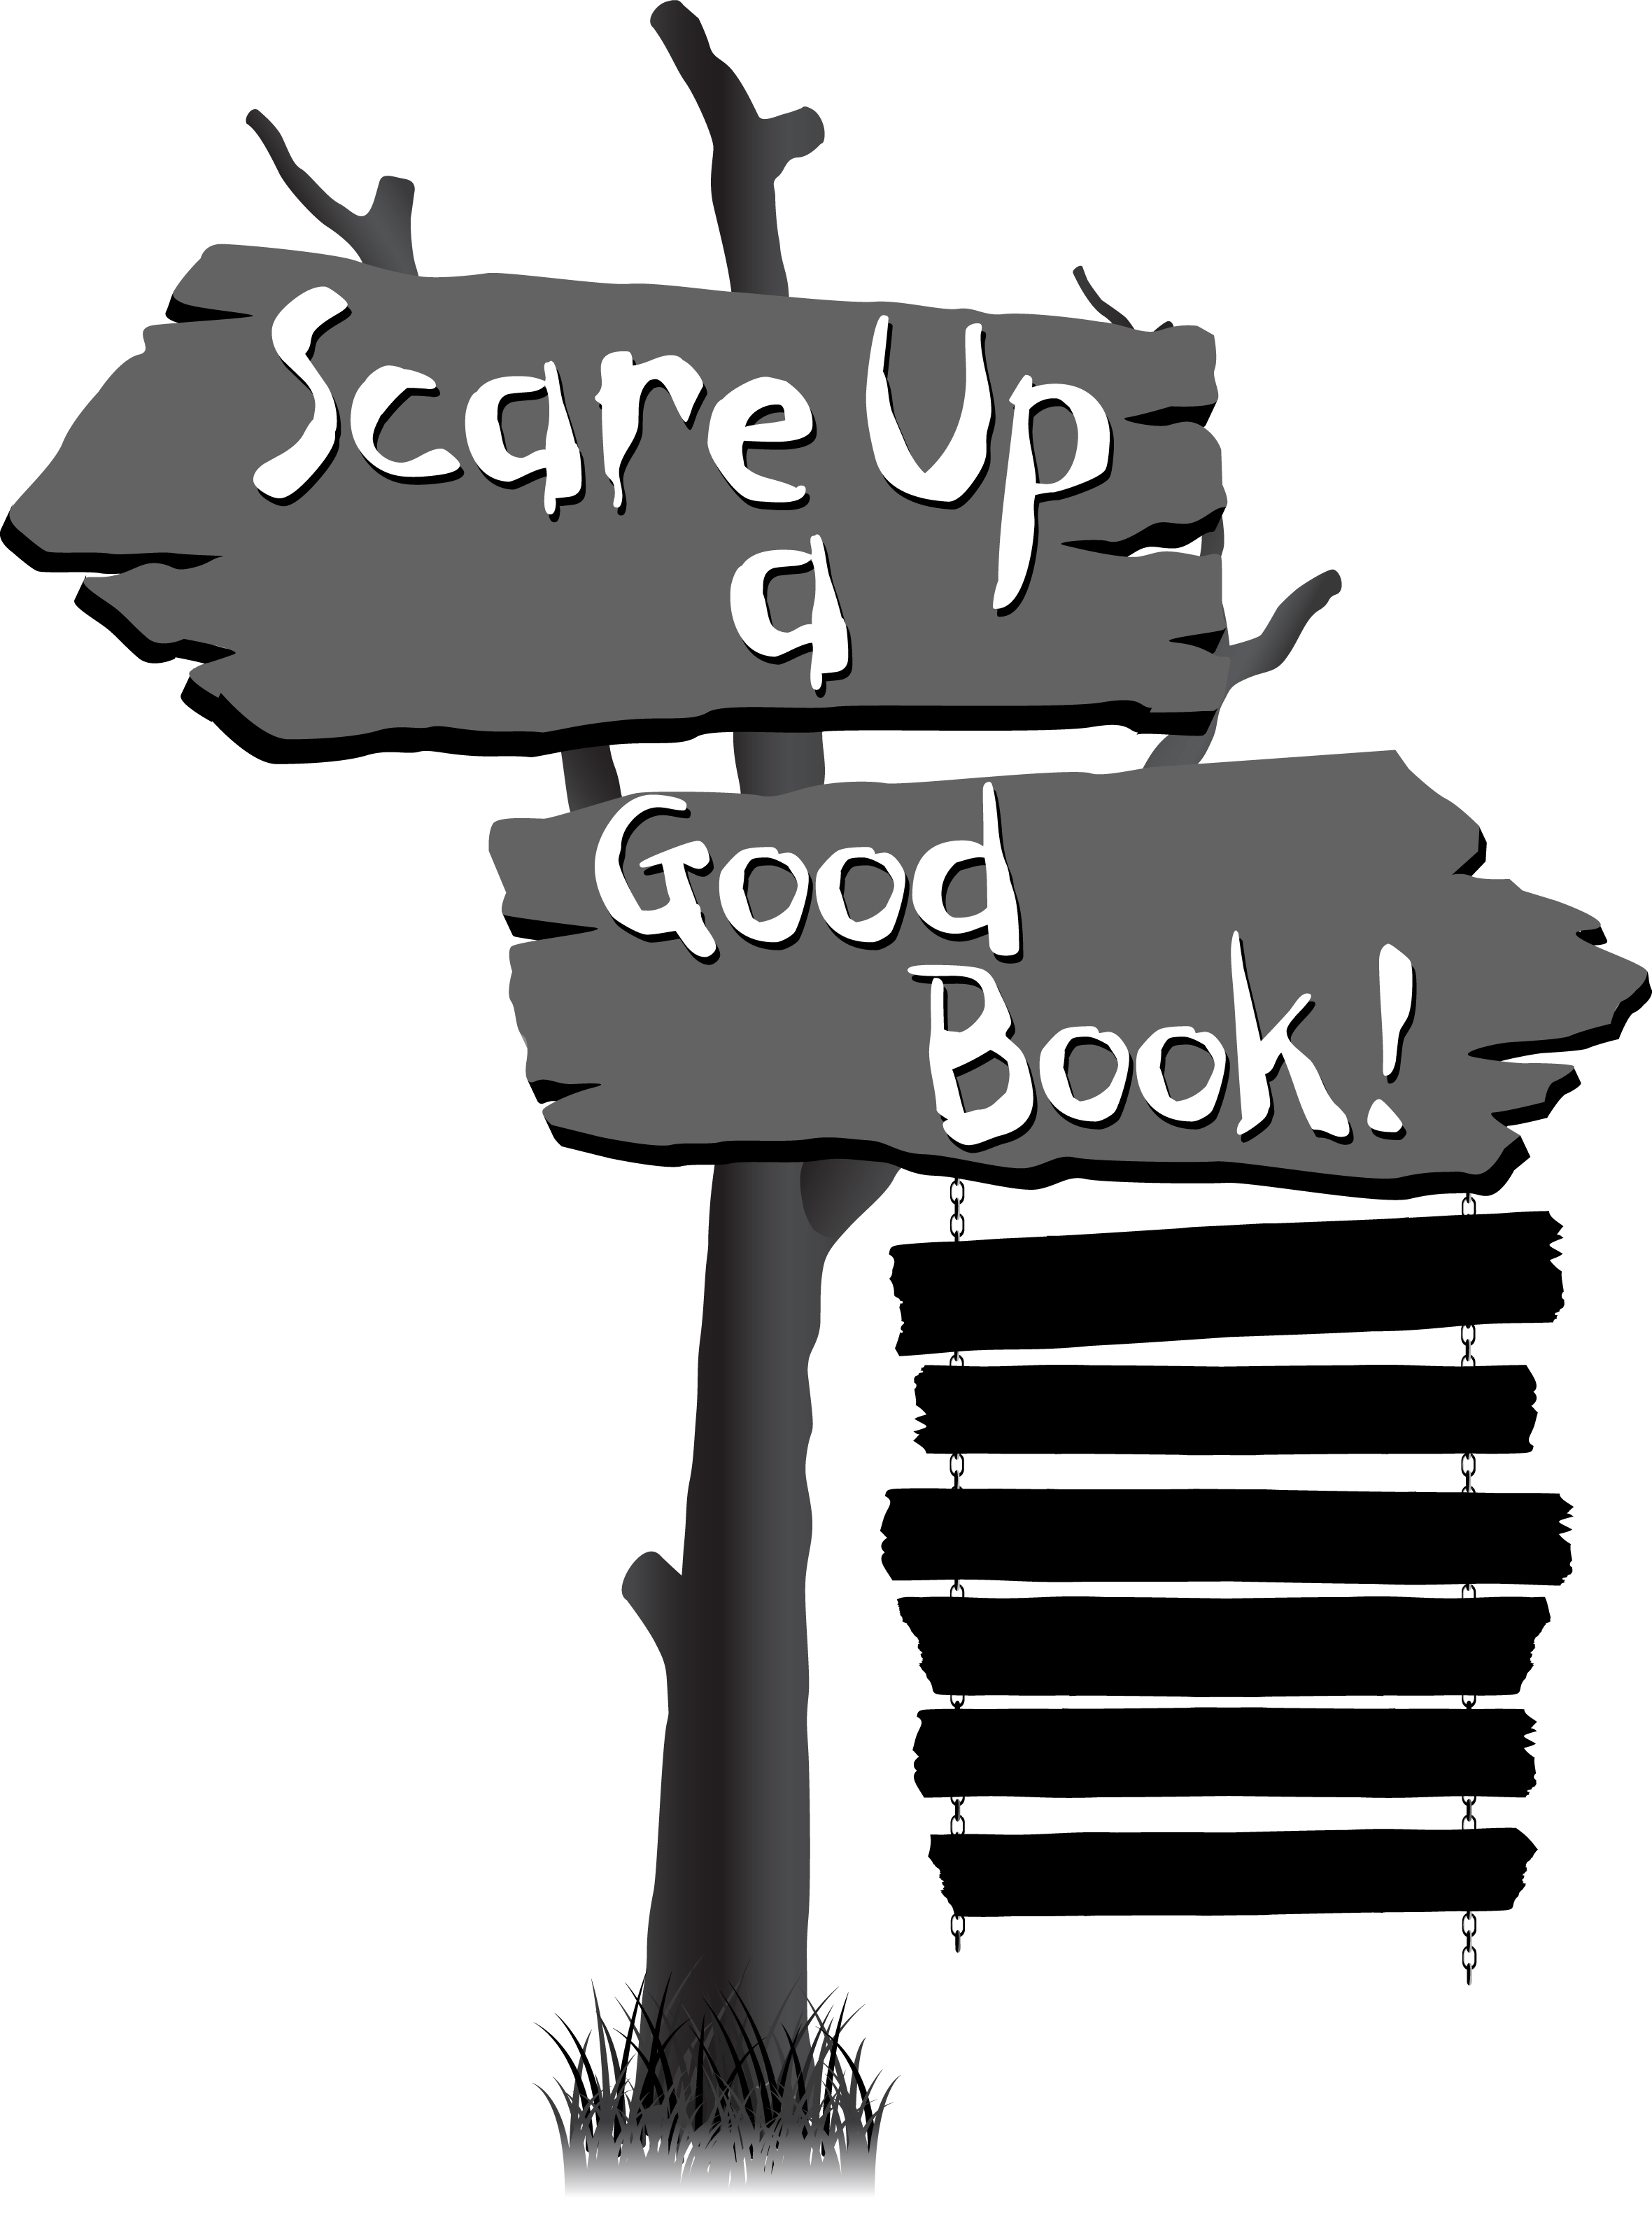 scare up a good book